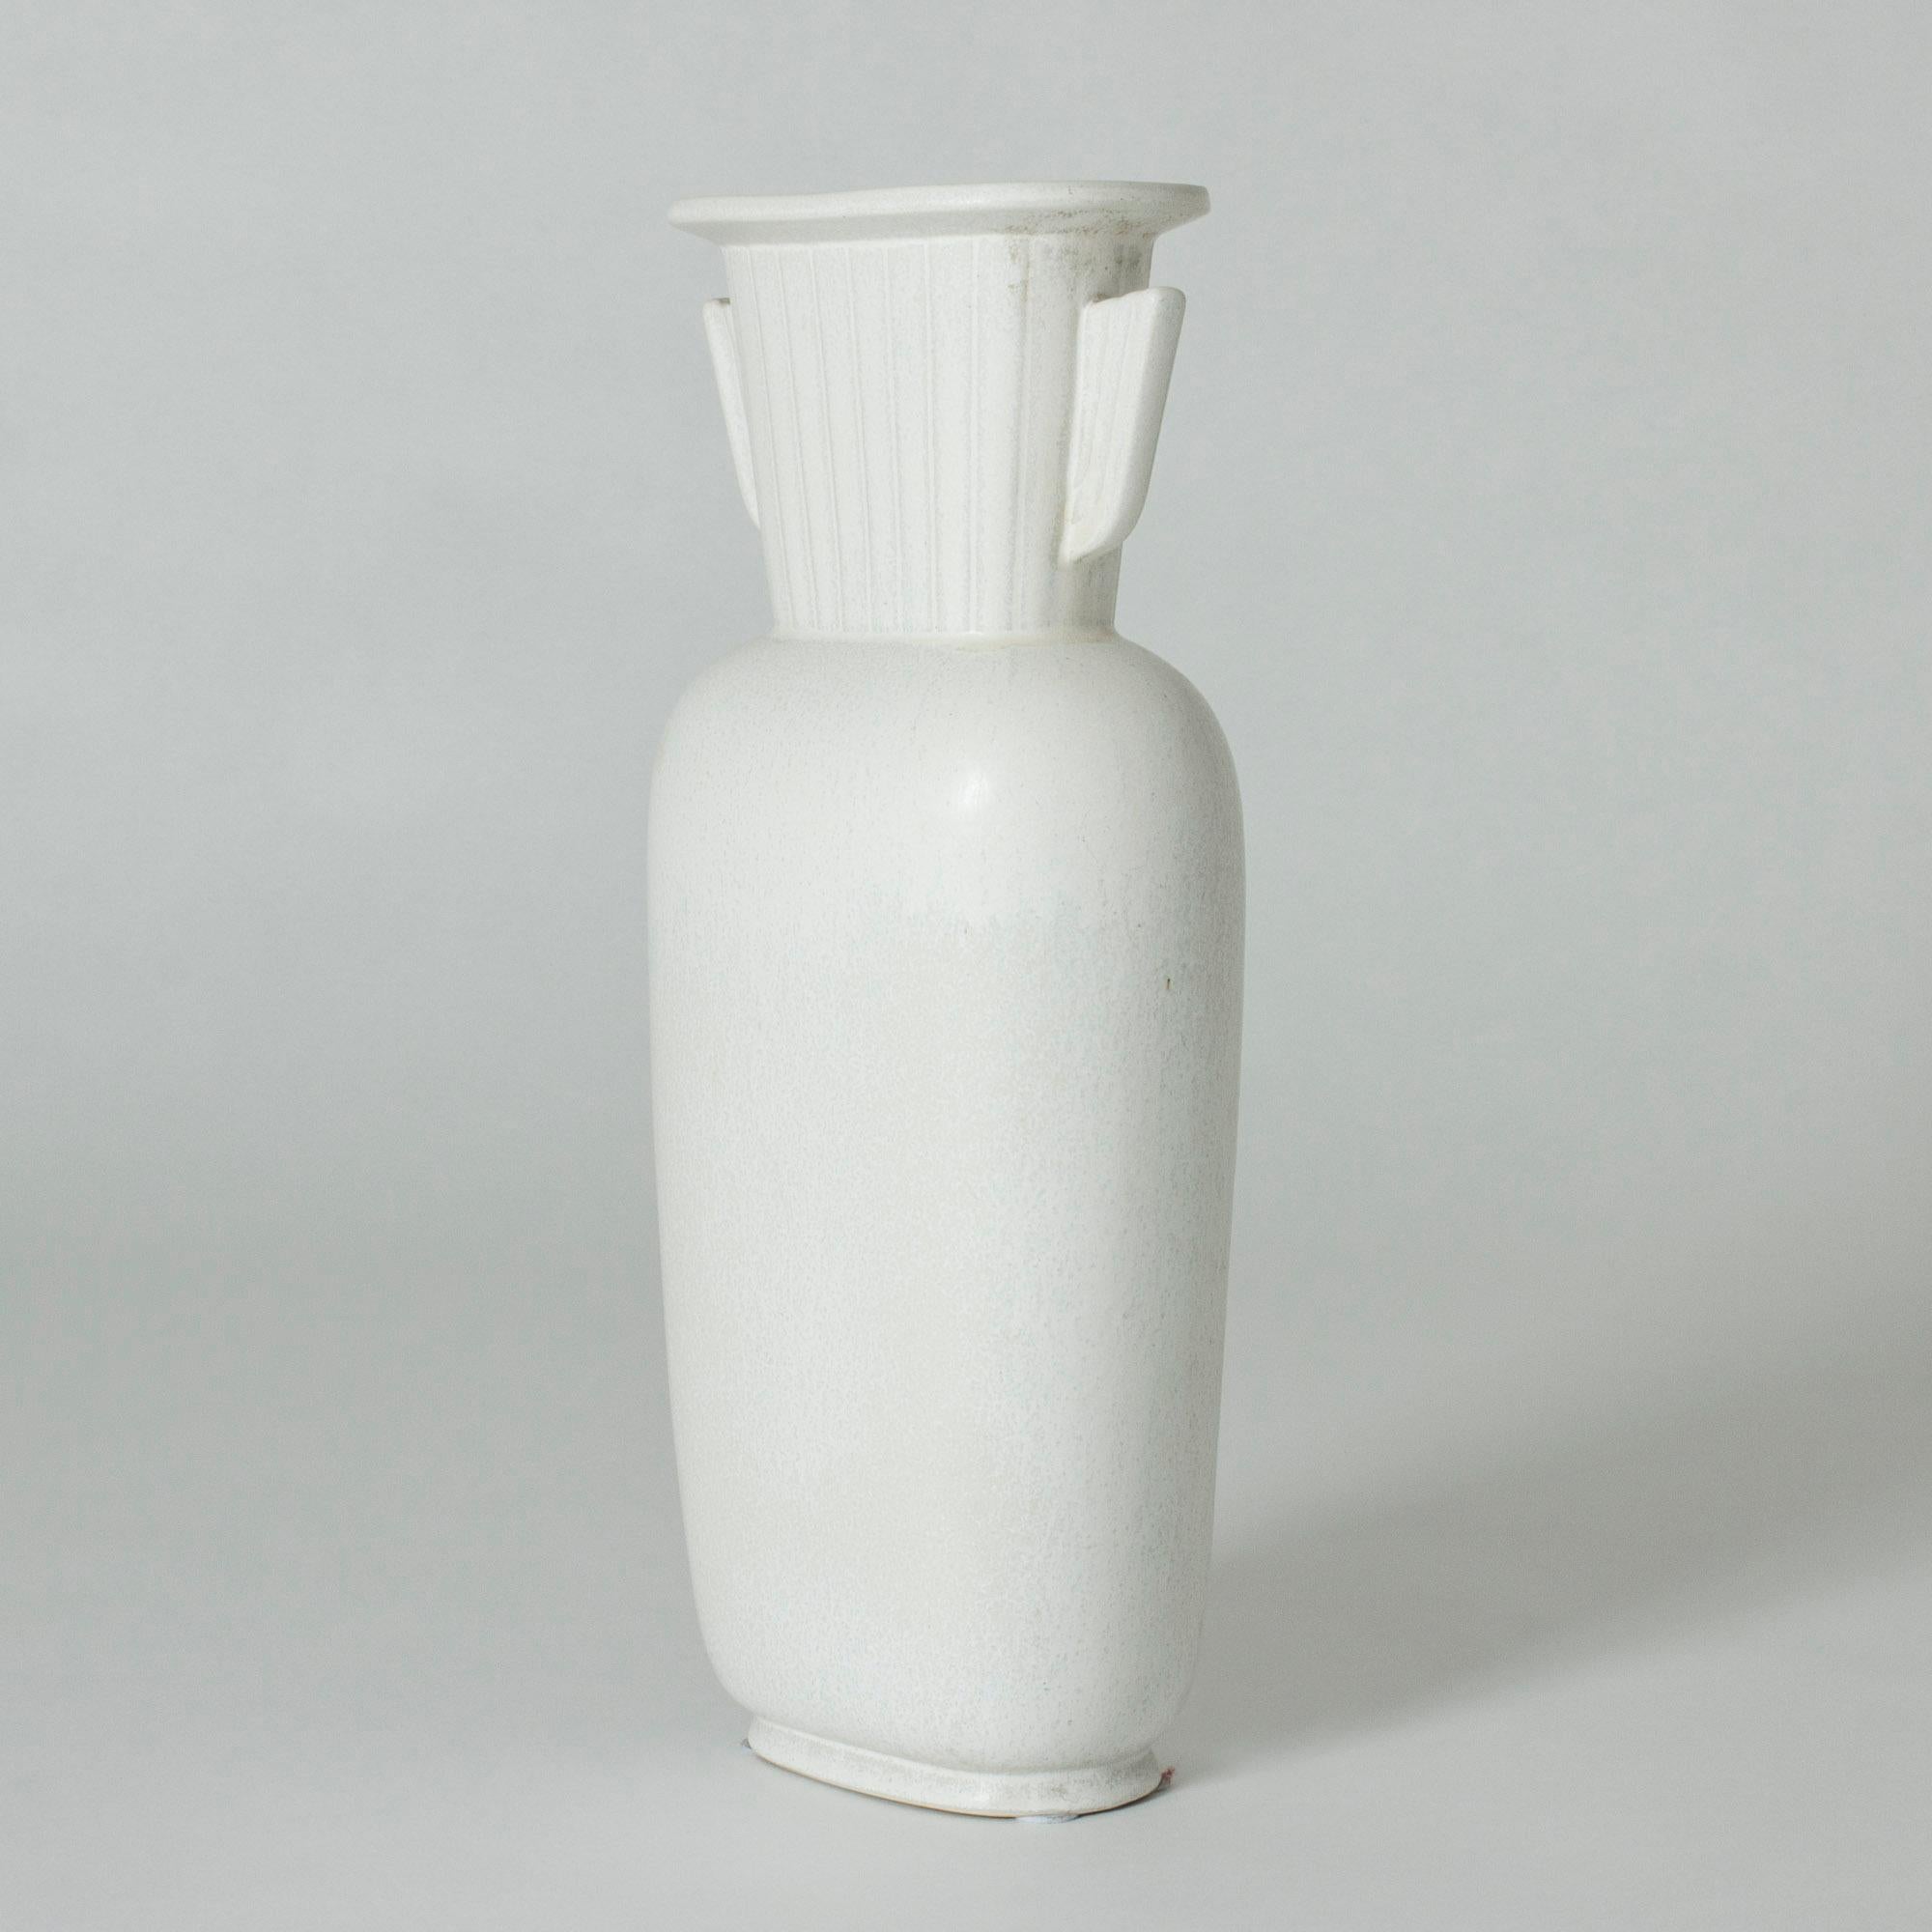 Tall stoneware vase in a statuesque design by Gunnar Nylund. Clean, soft lines. Beautiful eggshell glaze with a subtle “Mimosa” pattern.